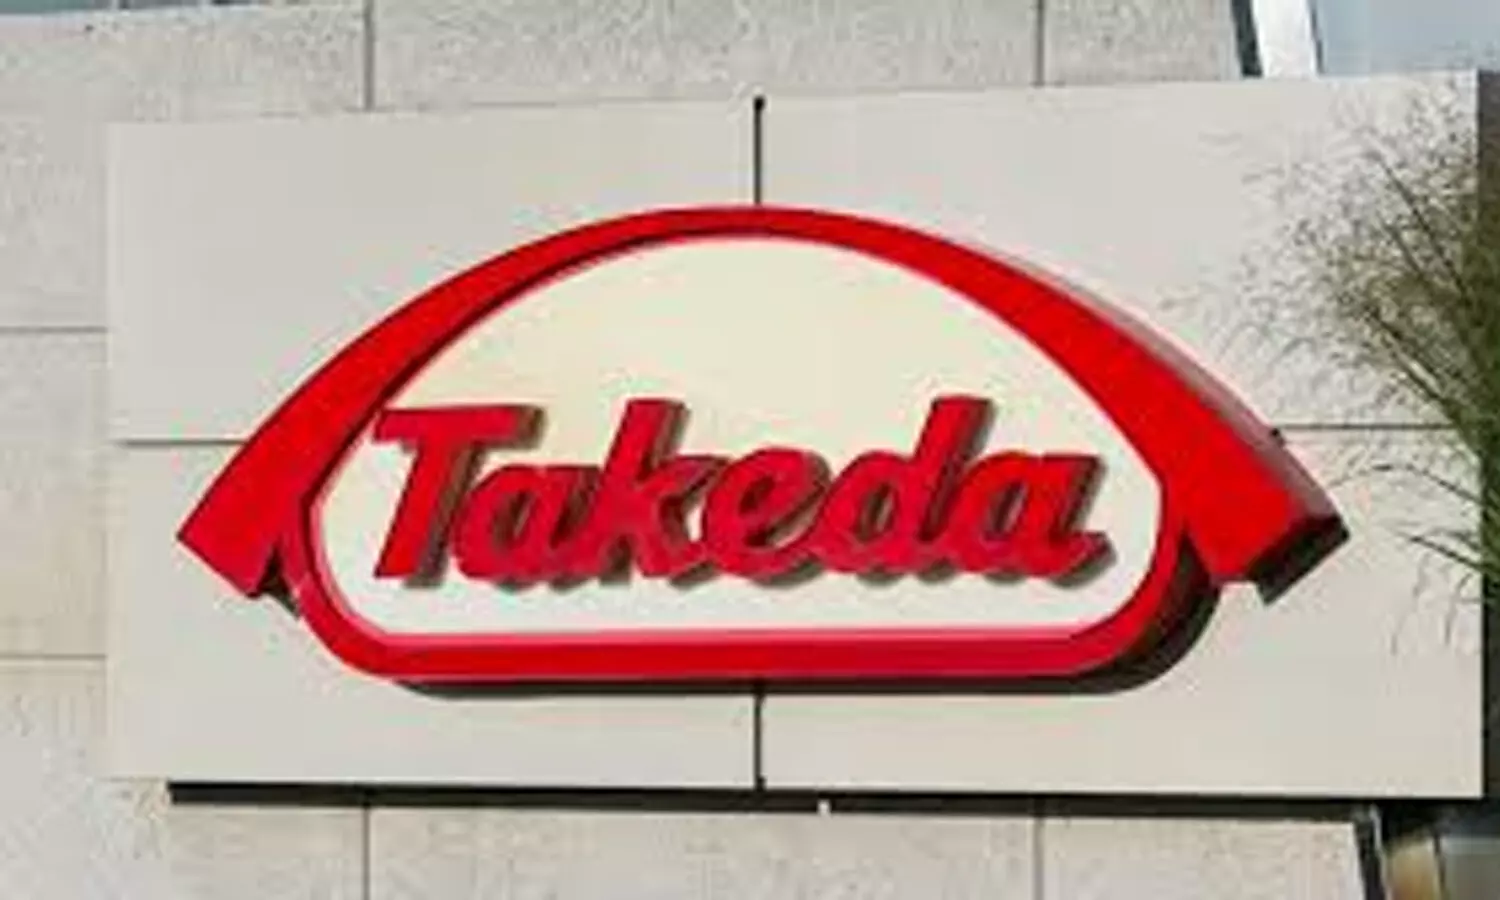 Takeda receives USFDA Complete Response Letter for Budesonide Oral Suspension